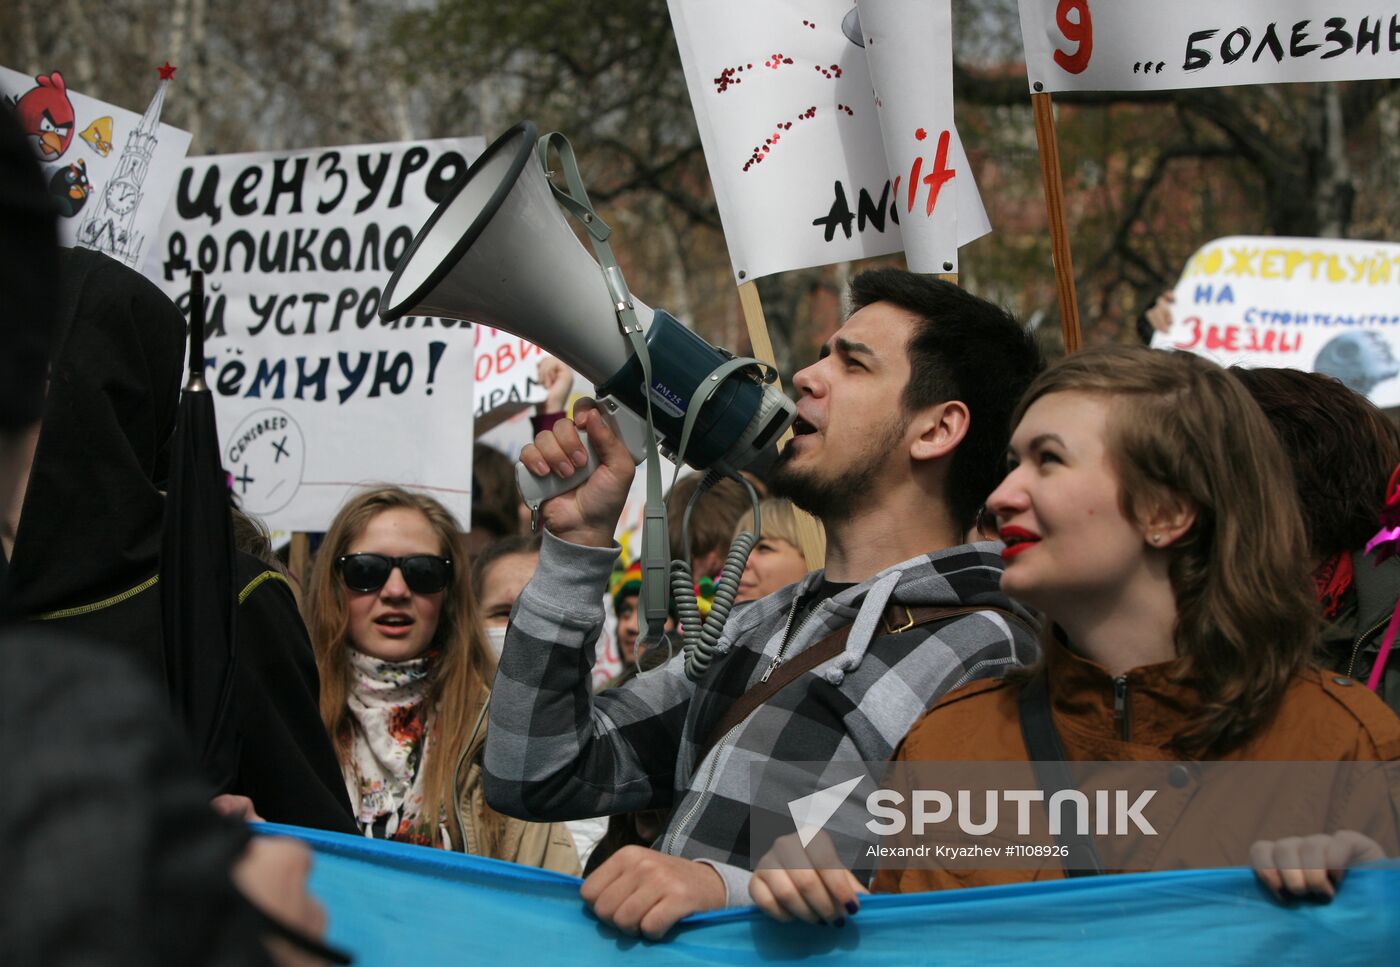 May Day "Monstration" in Novosibirsk